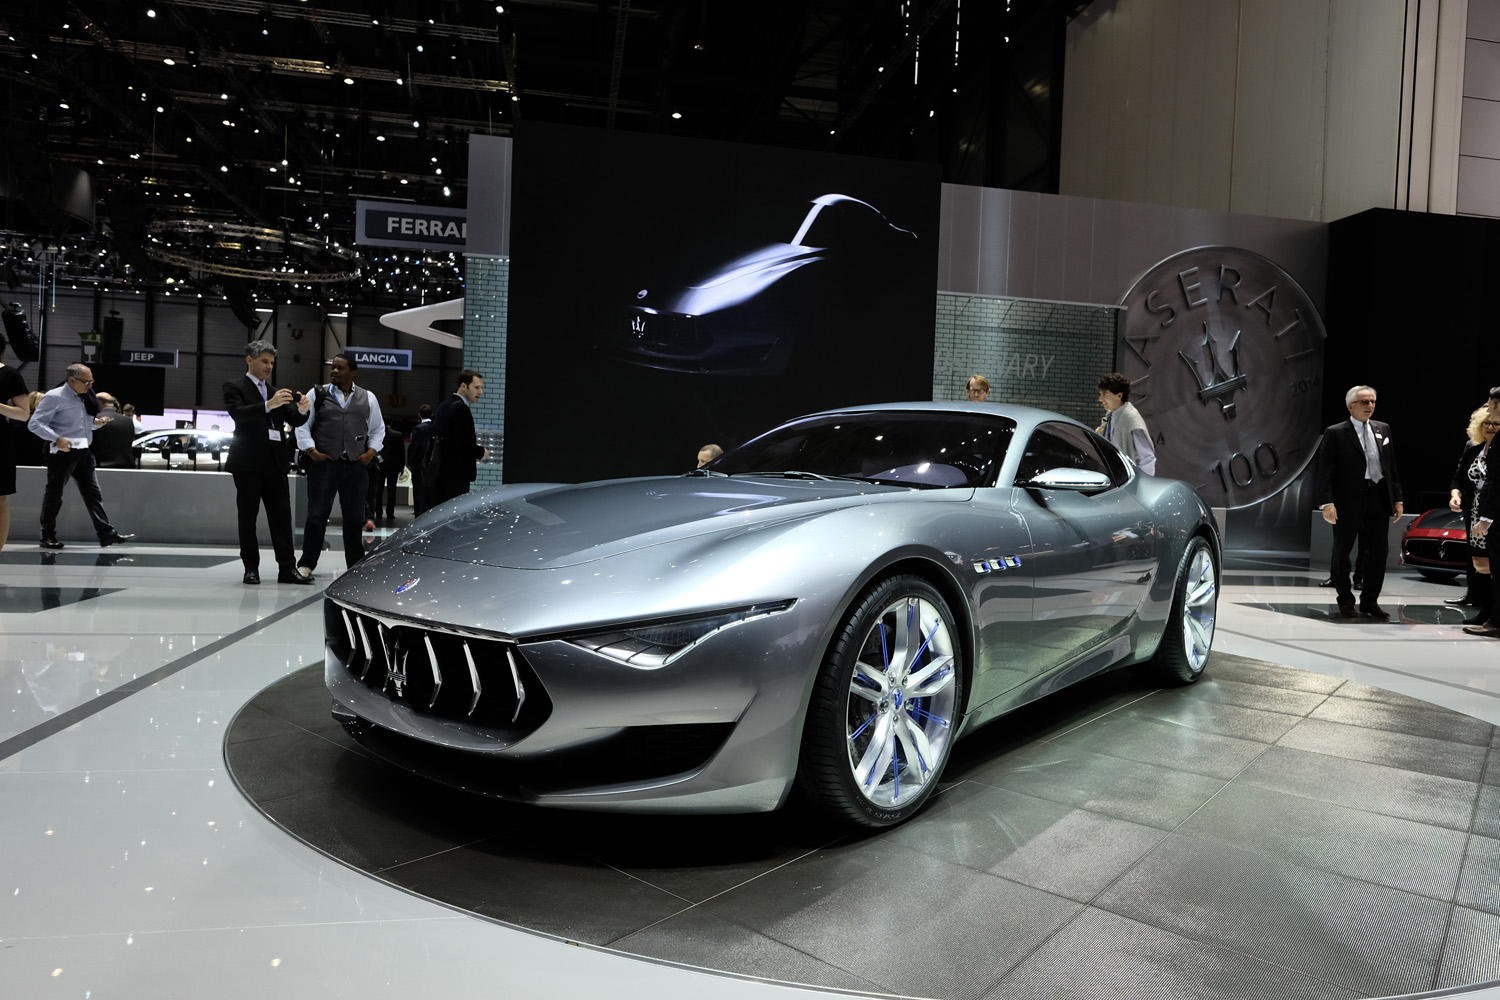 The 12 most amazing concept cars from this year’s Geneva Motor Show BGR